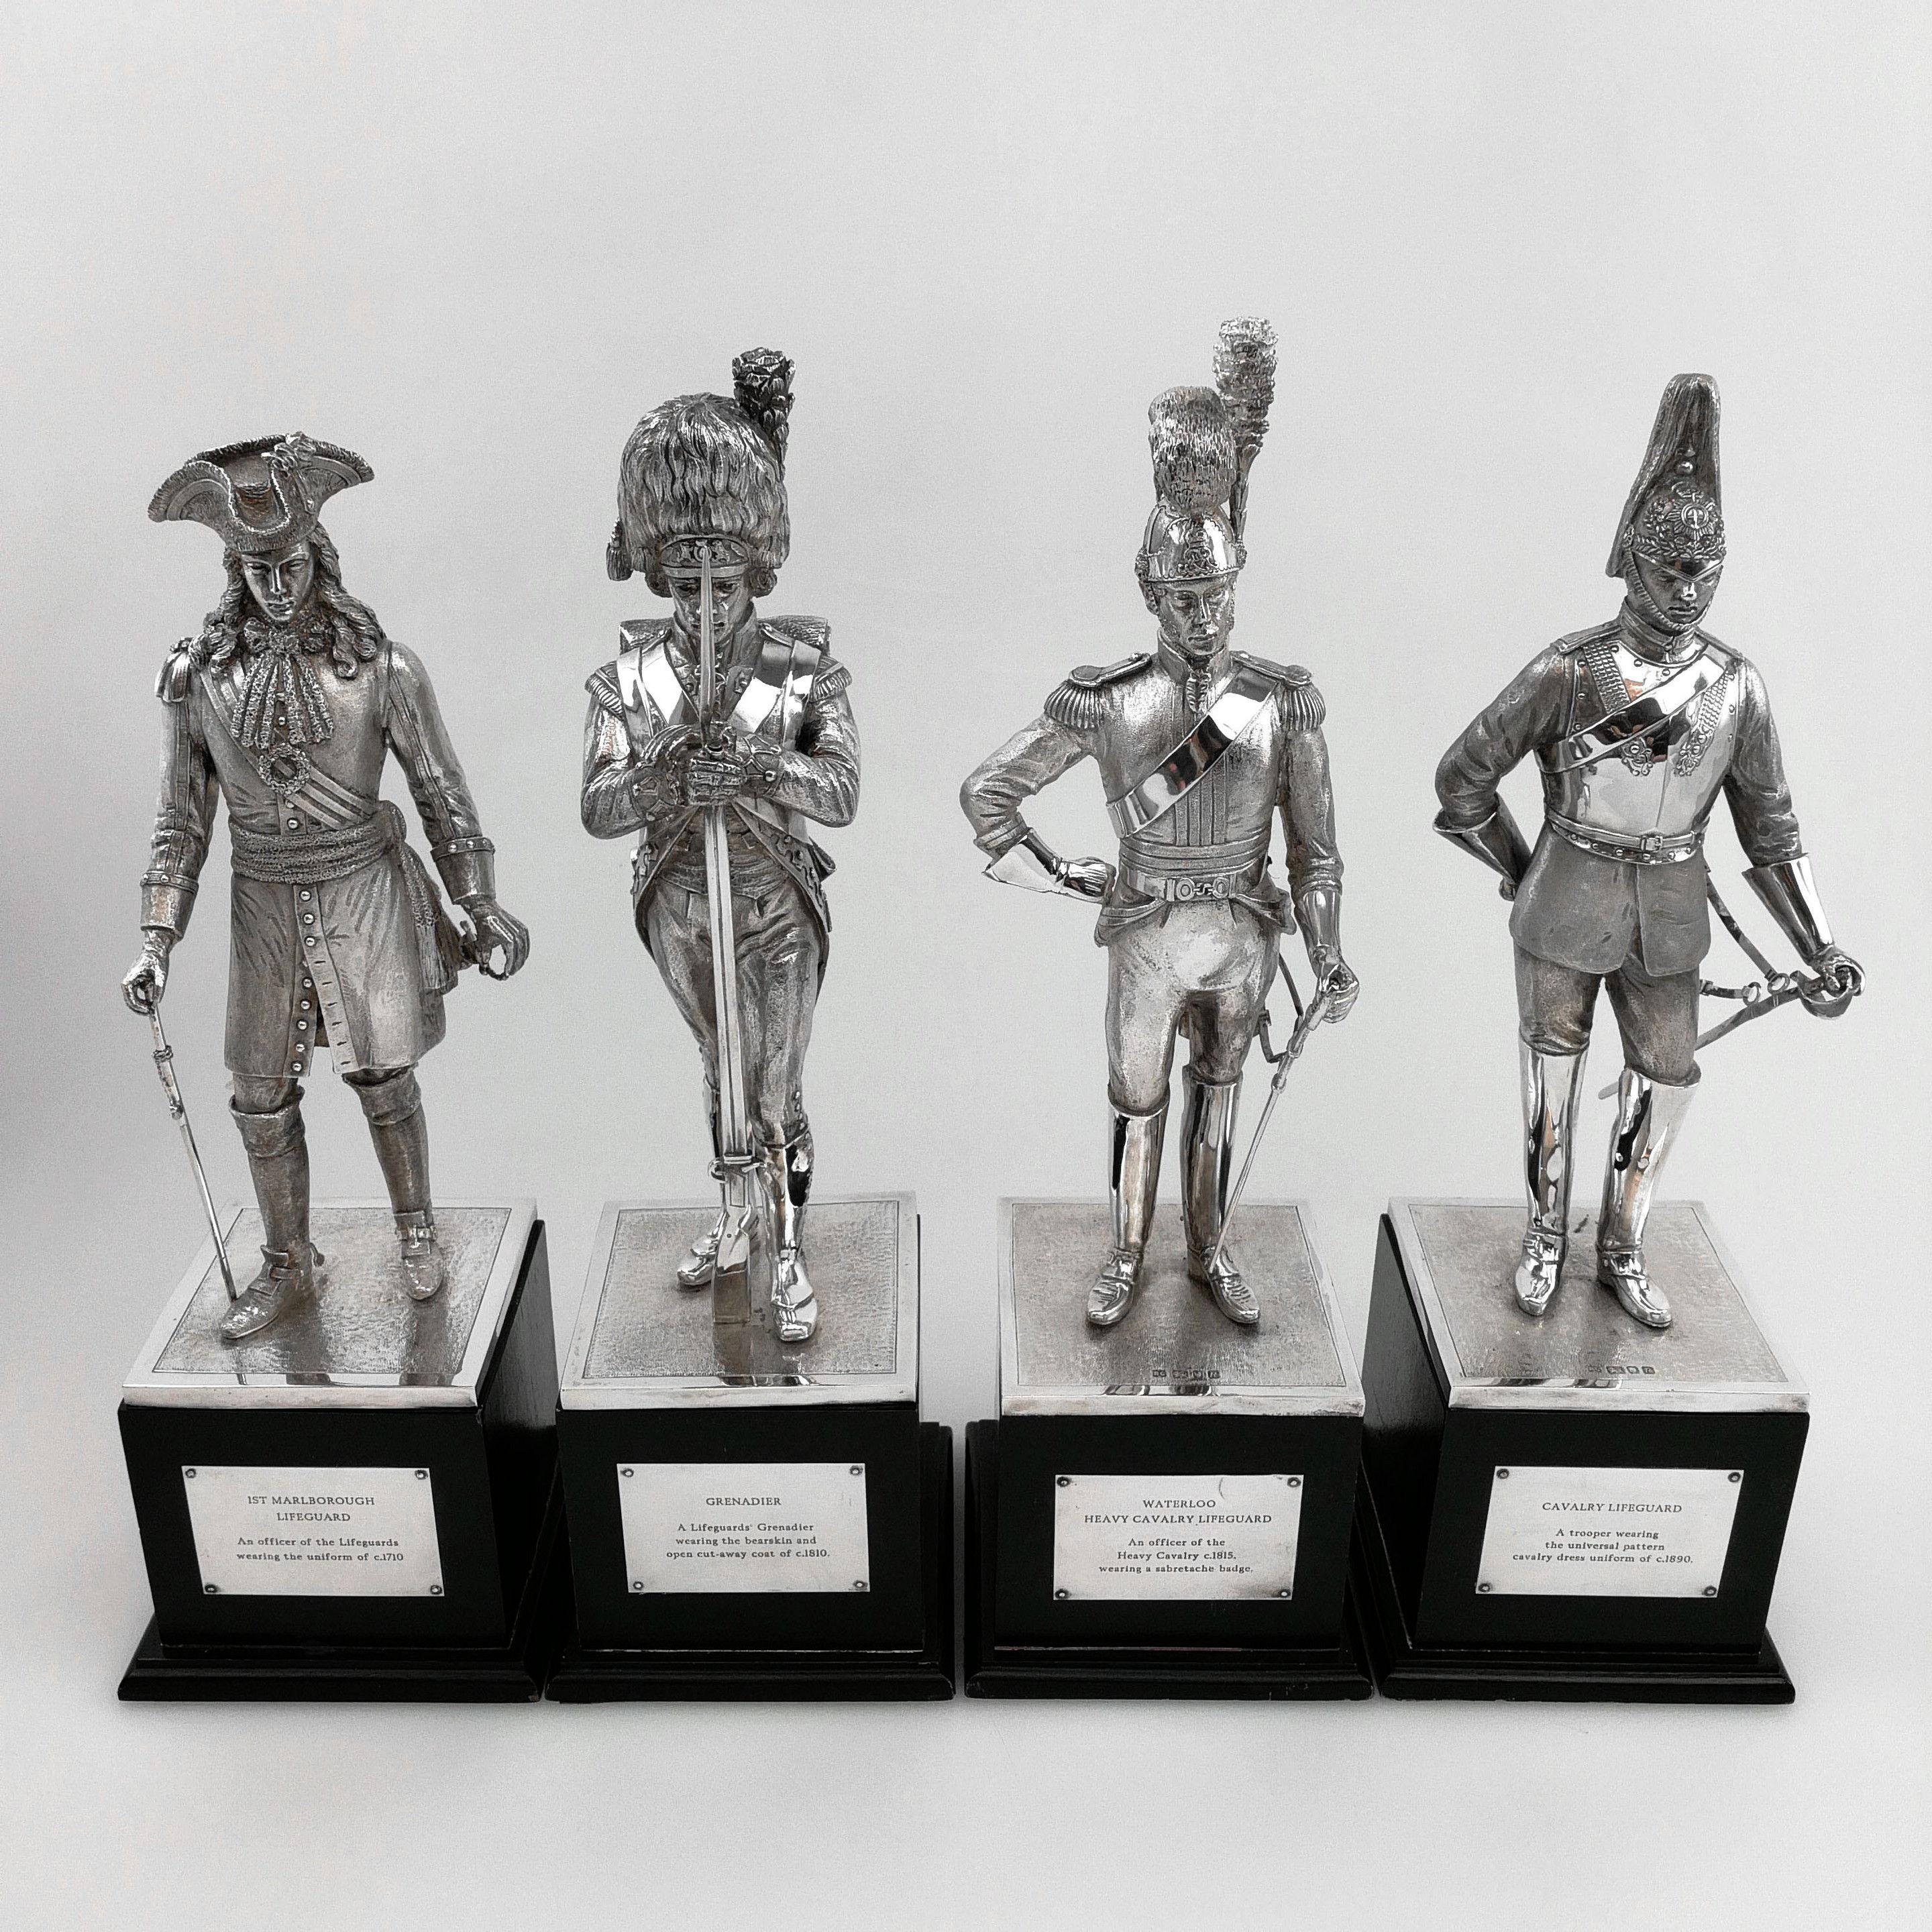 A magnificent set of Four sterling Silver Military Models depicting members of the Lifeguards Regiment over the period, circa 1710 - 1830. Each figure is modelled with an incredible attention to detail, showing the uniform, equipment and weapons